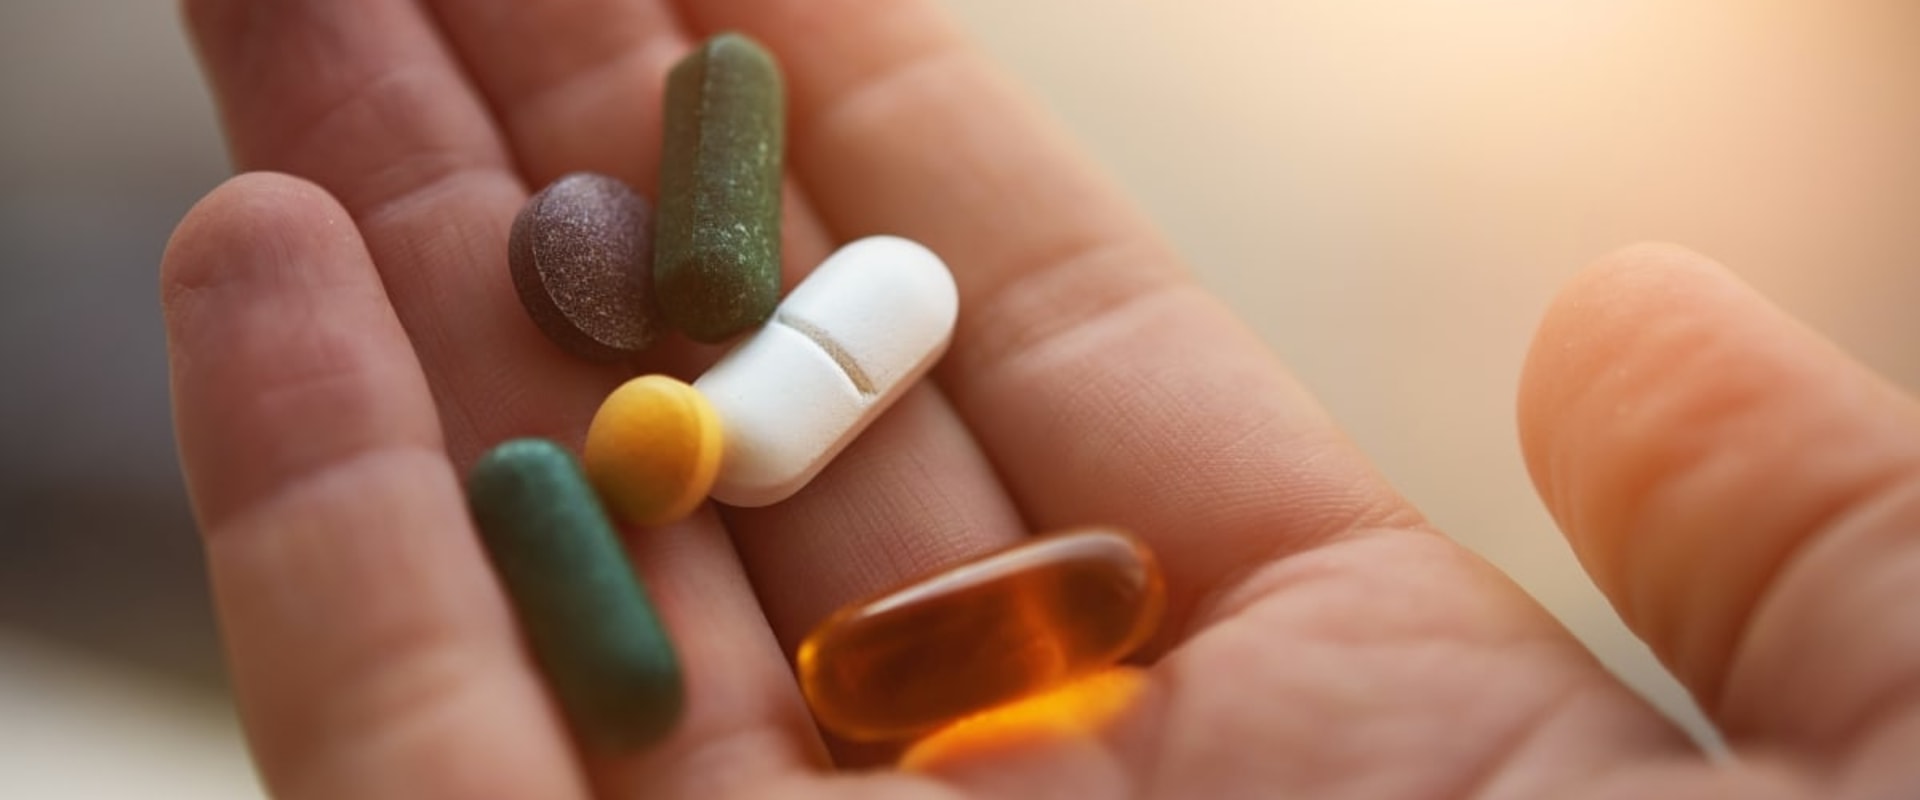 Why the FDA Does Not Regulate Dietary Supplements: An Expert's Perspective